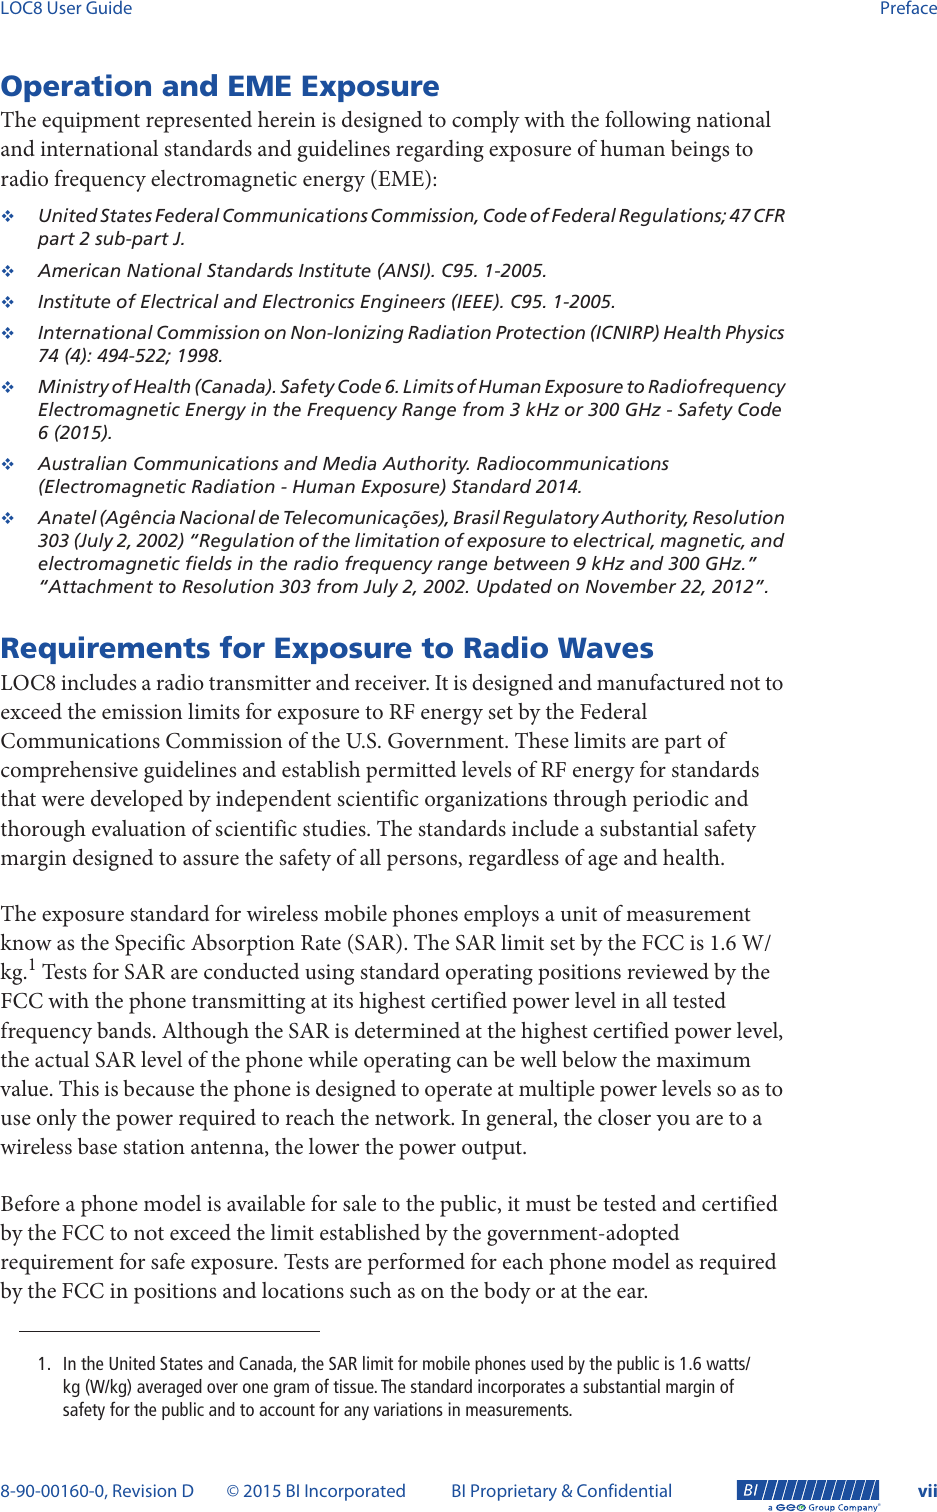 LOC8 User Guide Preface8-90-00160-0, Revision D © 2015 BI Incorporated BI Proprietary &amp; Confidential vii®Operation and EME ExposureThe equipment represented herein is designed to comply with the following national and international standards and guidelines regarding exposure of human beings to radio frequency electromagnetic energy (EME):United States Federal Communications Commission, Code of Federal Regulations; 47 CFR part 2 sub-part J.American National Standards Institute (ANSI). C95. 1-2005.Institute of Electrical and Electronics Engineers (IEEE). C95. 1-2005.International Commission on Non-Ionizing Radiation Protection (ICNIRP) Health Physics 74 (4): 494-522; 1998.Ministry of Health (Canada). Safety Code 6. Limits of Human Exposure to Radiofrequency Electromagnetic Energy in the Frequency Range from 3 kHz or 300 GHz - Safety Code 6 (2015).Australian Communications and Media Authority. Radiocommunications (Electromagnetic Radiation - Human Exposure) Standard 2014.Anatel (Agência Nacional de Telecomunicações), Brasil Regulatory Authority, Resolution 303 (July 2, 2002) “Regulation of the limitation of exposure to electrical, magnetic, and electromagnetic fields in the radio frequency range between 9 kHz and 300 GHz.” “Attachment to Resolution 303 from July 2, 2002. Updated on November 22, 2012”.Requirements for Exposure to Radio WavesLOC8 includes a radio transmitter and receiver. It is designed and manufactured not to exceed the emission limits for exposure to RF energy set by the Federal Communications Commission of the U.S. Government. These limits are part of comprehensive guidelines and establish permitted levels of RF energy for standards that were developed by independent scientific organizations through periodic and thorough evaluation of scientific studies. The standards include a substantial safety margin designed to assure the safety of all persons, regardless of age and health.The exposure standard for wireless mobile phones employs a unit of measurement know as the Specific Absorption Rate (SAR). The SAR limit set by the FCC is 1.6 W/kg.1 Tests for SAR are conducted using standard operating positions reviewed by the FCC with the phone transmitting at its highest certified power level in all tested frequency bands. Although the SAR is determined at the highest certified power level, the actual SAR level of the phone while operating can be well below the maximum value. This is because the phone is designed to operate at multiple power levels so as to use only the power required to reach the network. In general, the closer you are to a wireless base station antenna, the lower the power output.Before a phone model is available for sale to the public, it must be tested and certified by the FCC to not exceed the limit established by the government-adopted requirement for safe exposure. Tests are performed for each phone model as required by the FCC in positions and locations such as on the body or at the ear.1. In the United States and Canada, the SAR limit for mobile phones used by the public is 1.6 watts/kg (W/kg) averaged over one gram of tissue. The standard incorporates a substantial margin of safety for the public and to account for any variations in measurements.